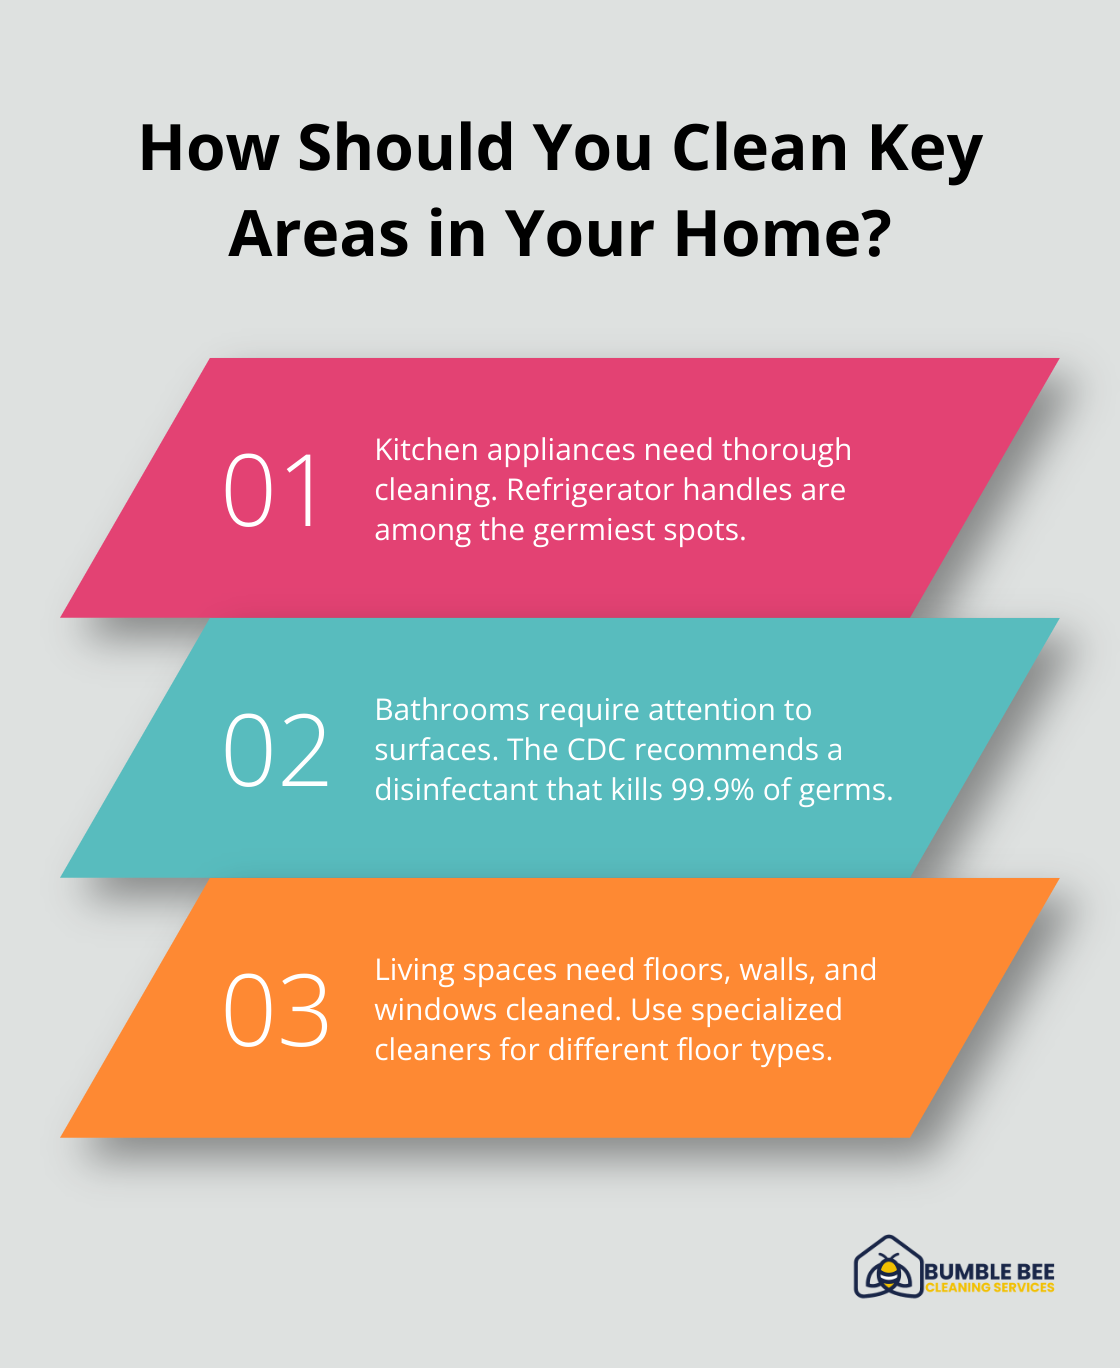 Fact - How Should You Clean Key Areas in Your Home?